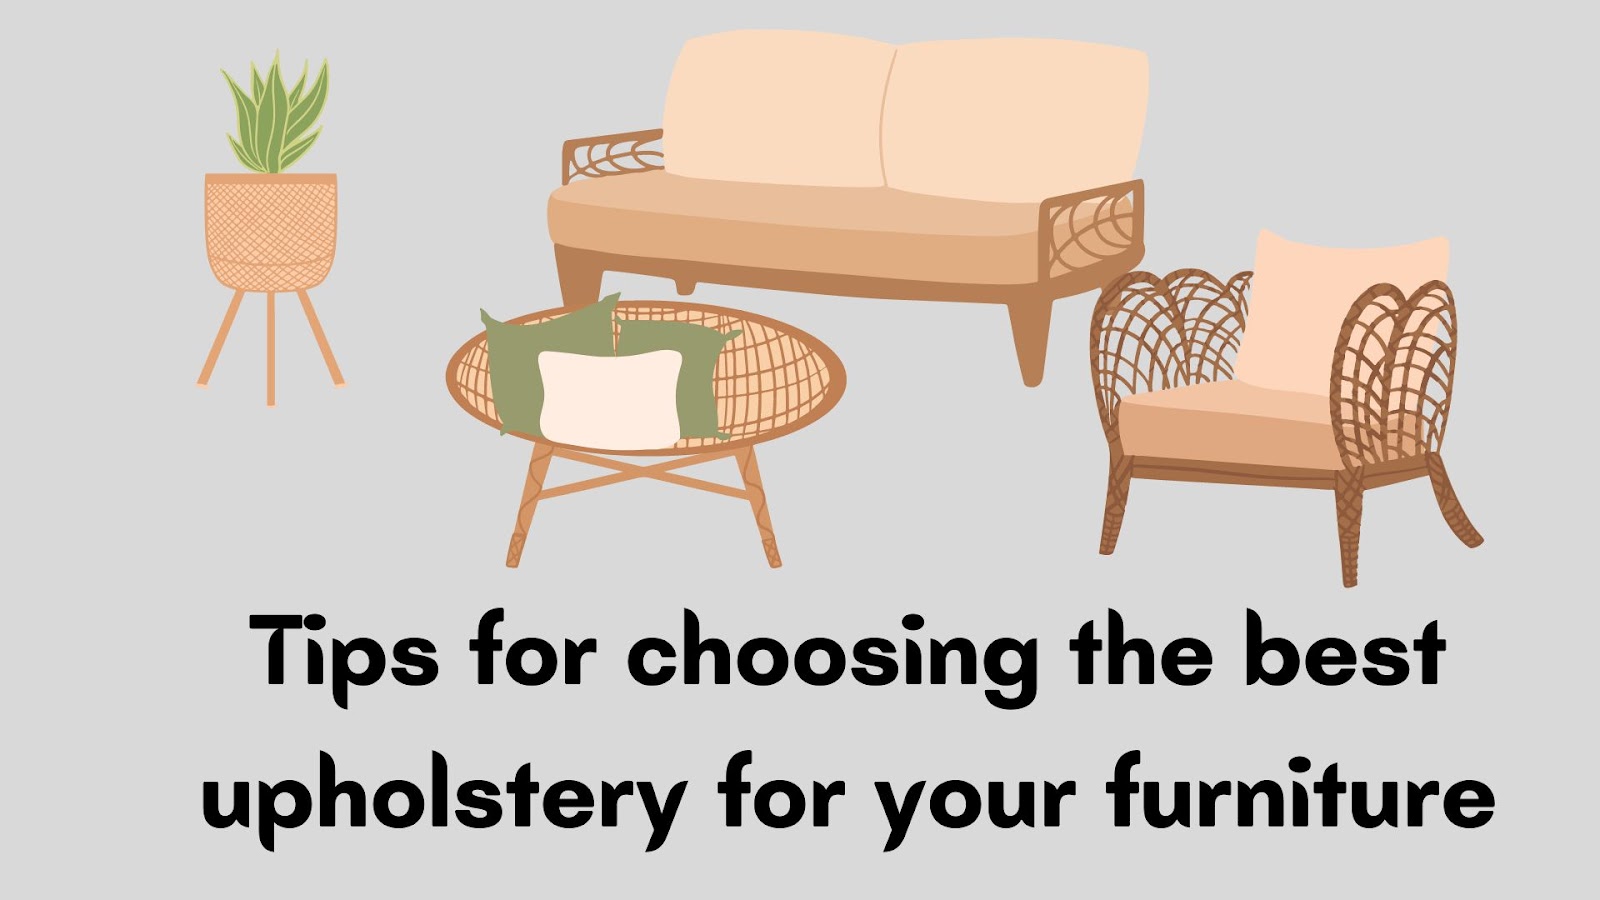 Tips for choosing the best upholstery for your furniture